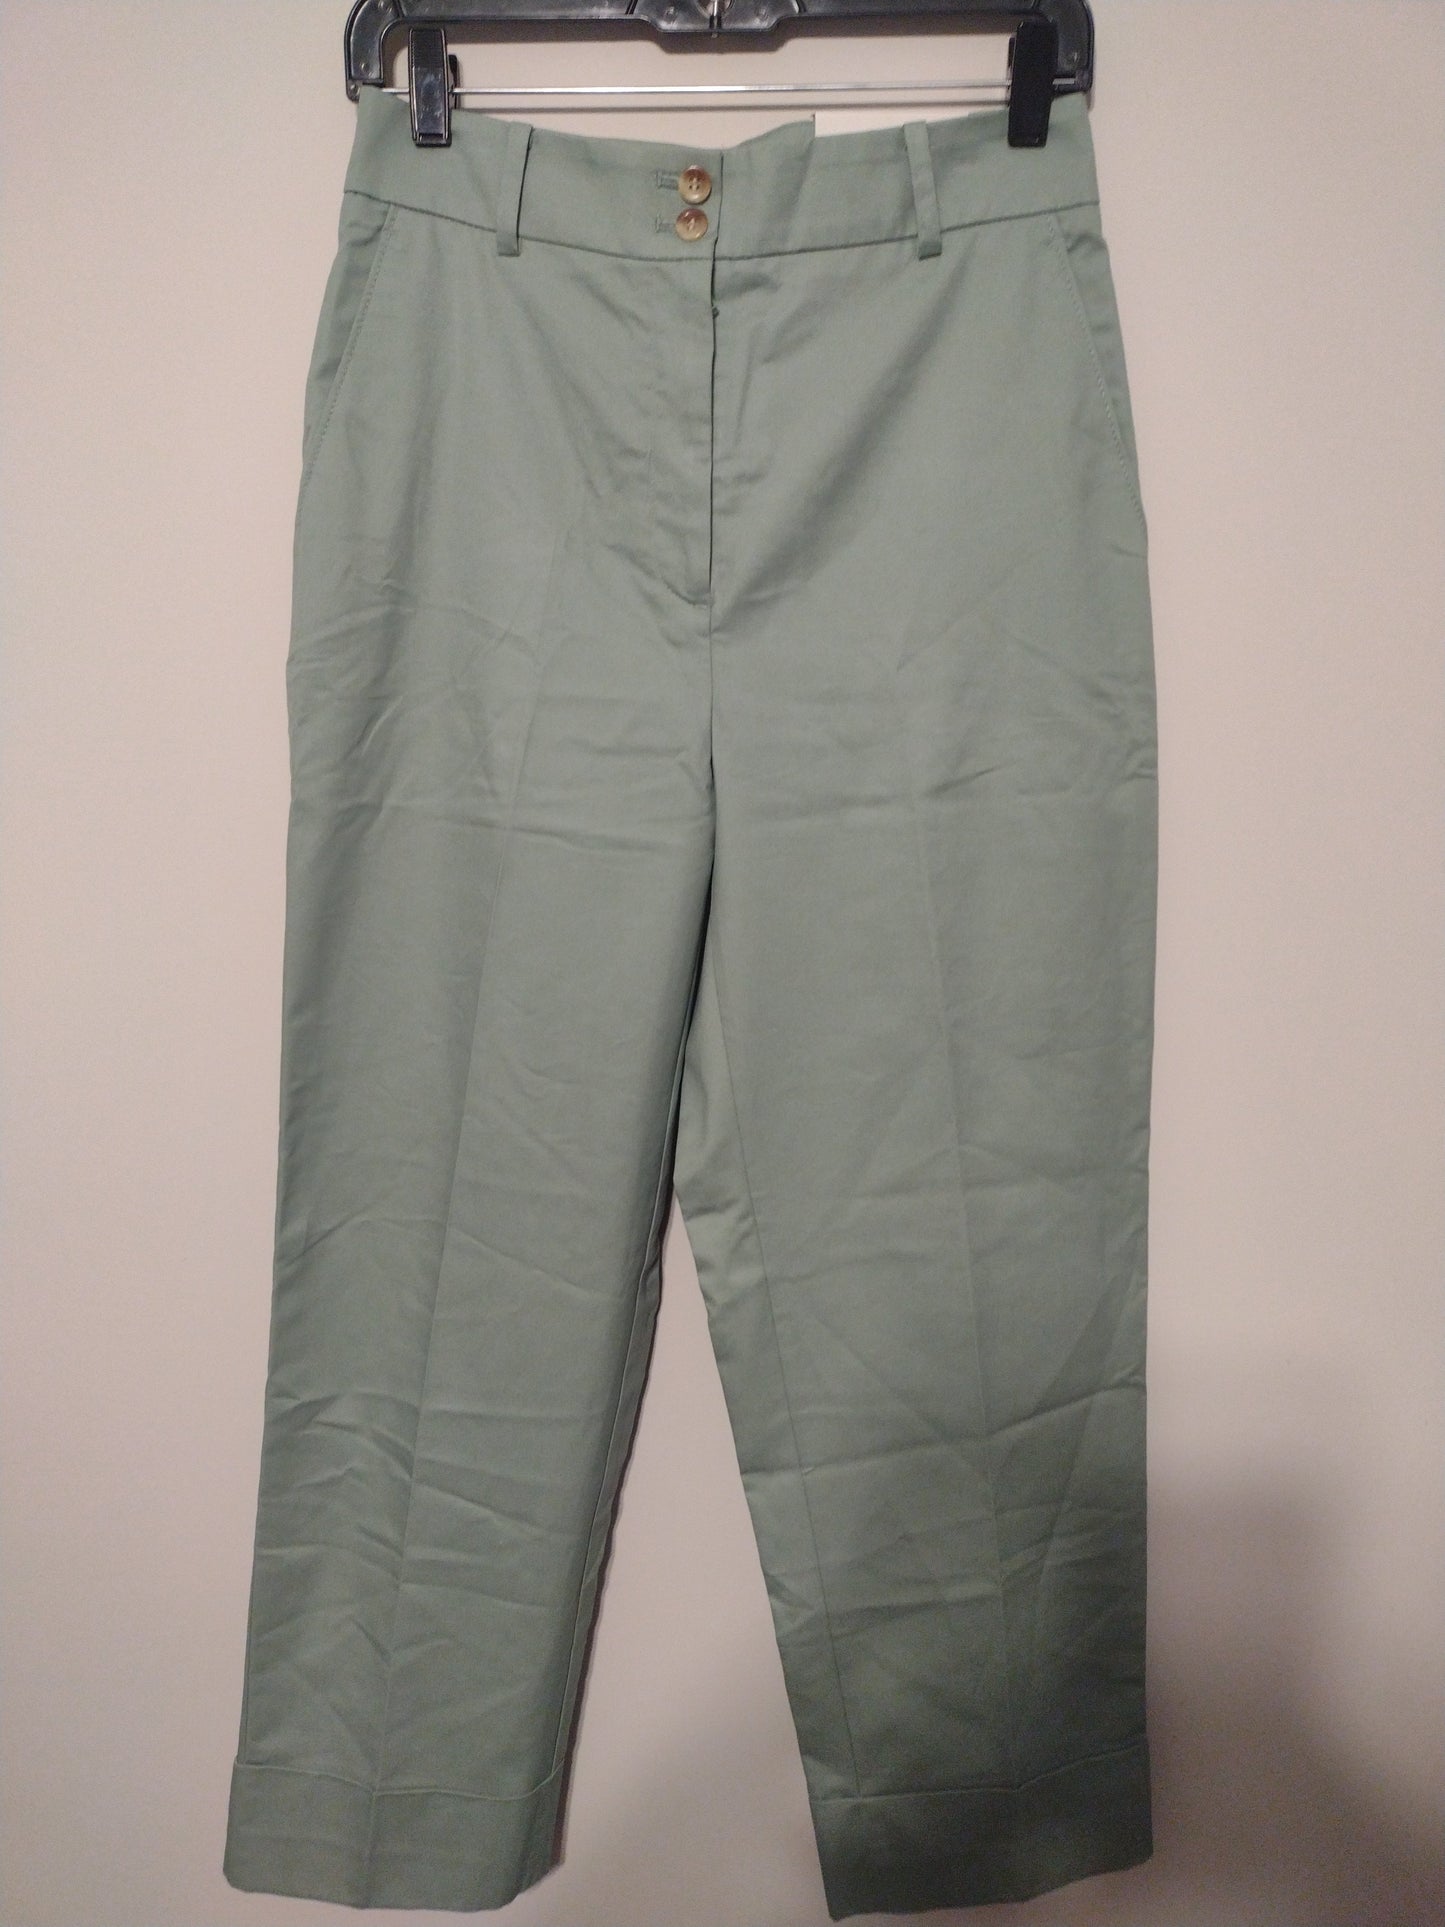 Pants Ankle By Ann Taylor  Size: 2